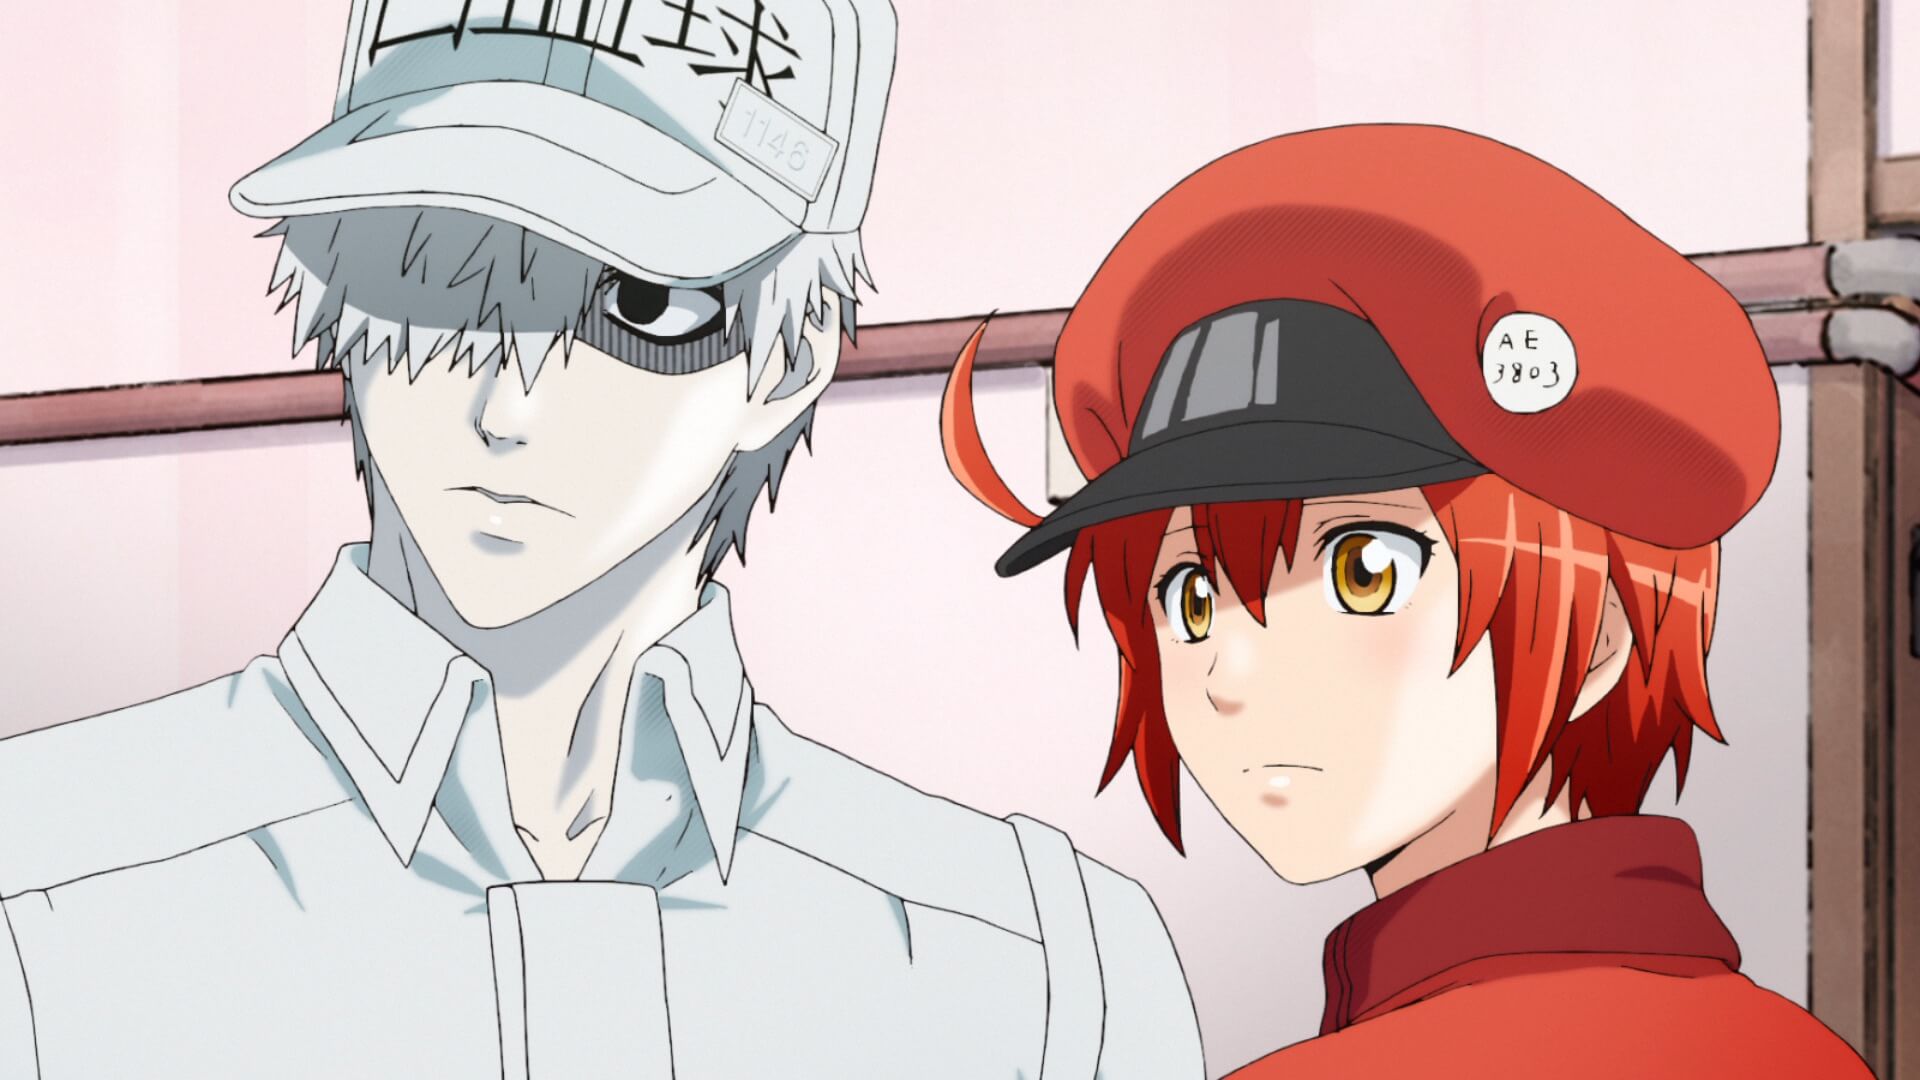 Cells At Work Illegal Manga Concludes in September with 4th Volume  Anime  India